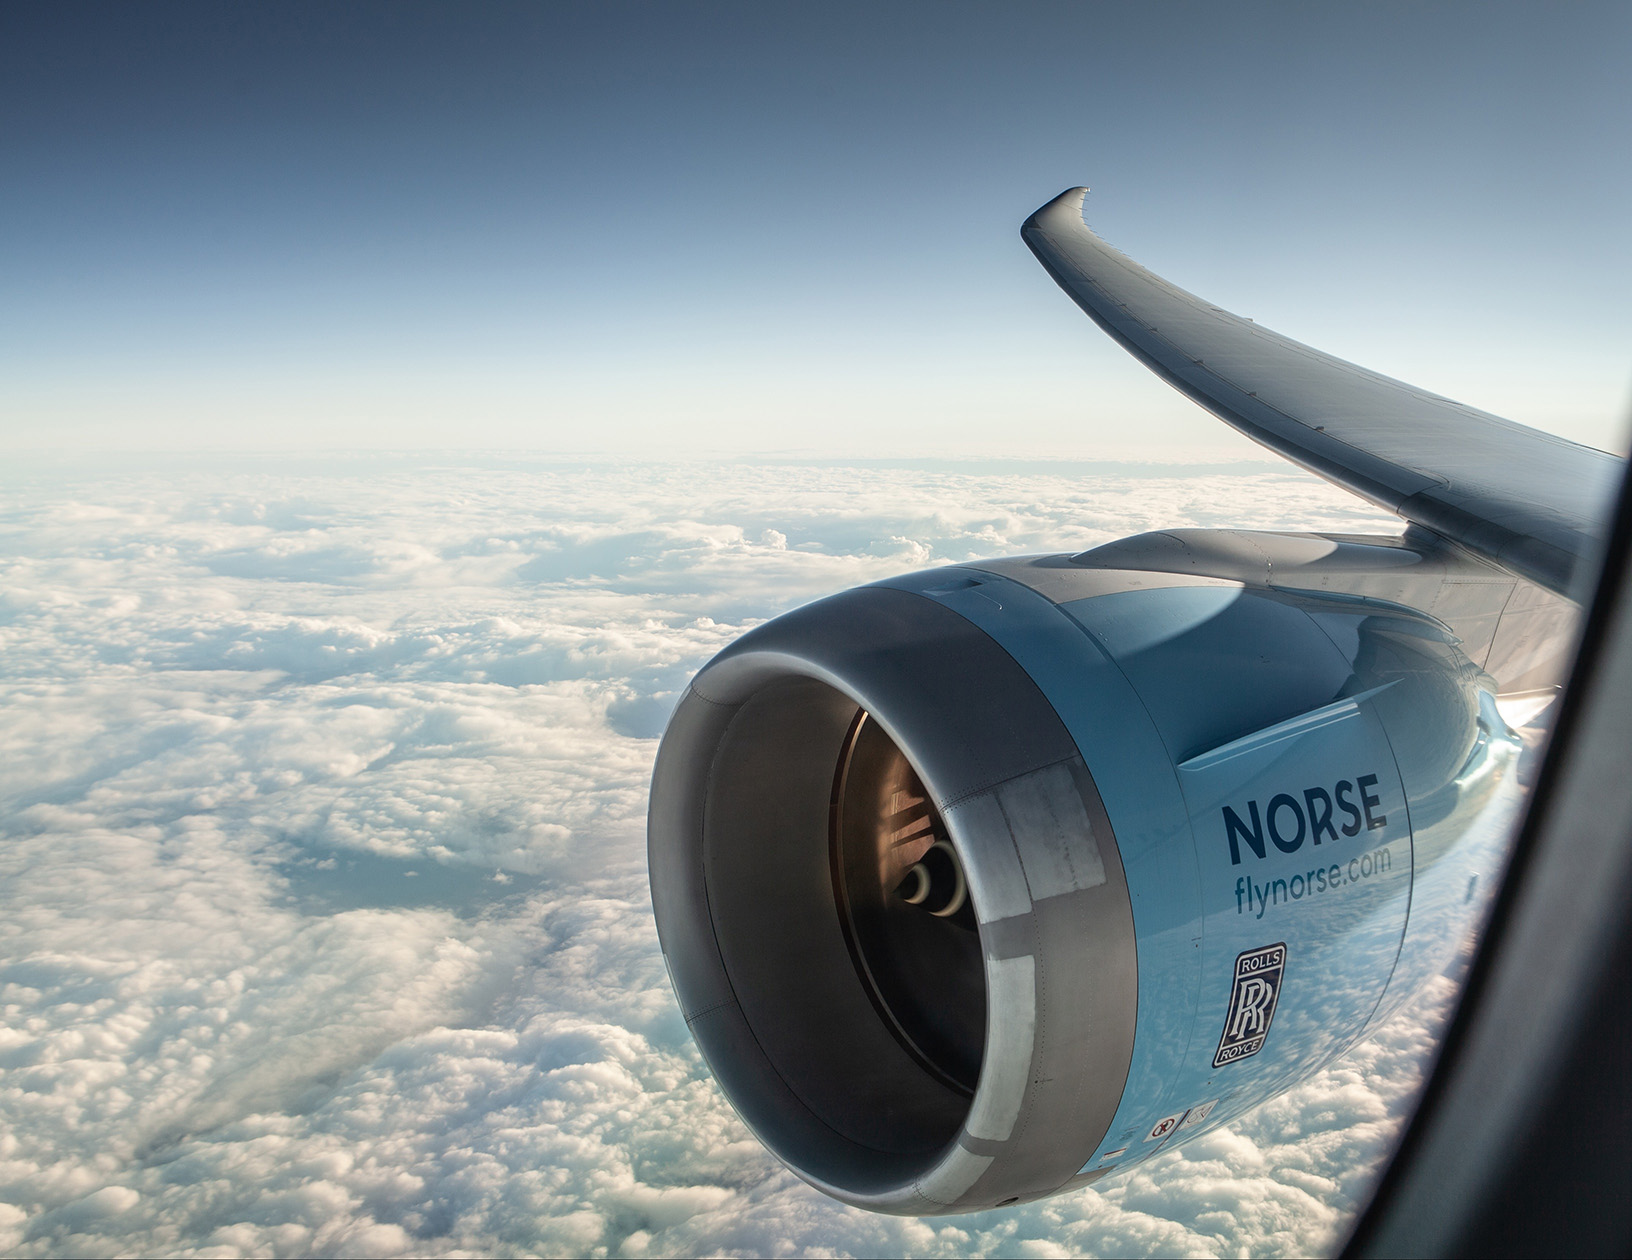 Norse Atlantic Airways announces new route from Paris to New York City